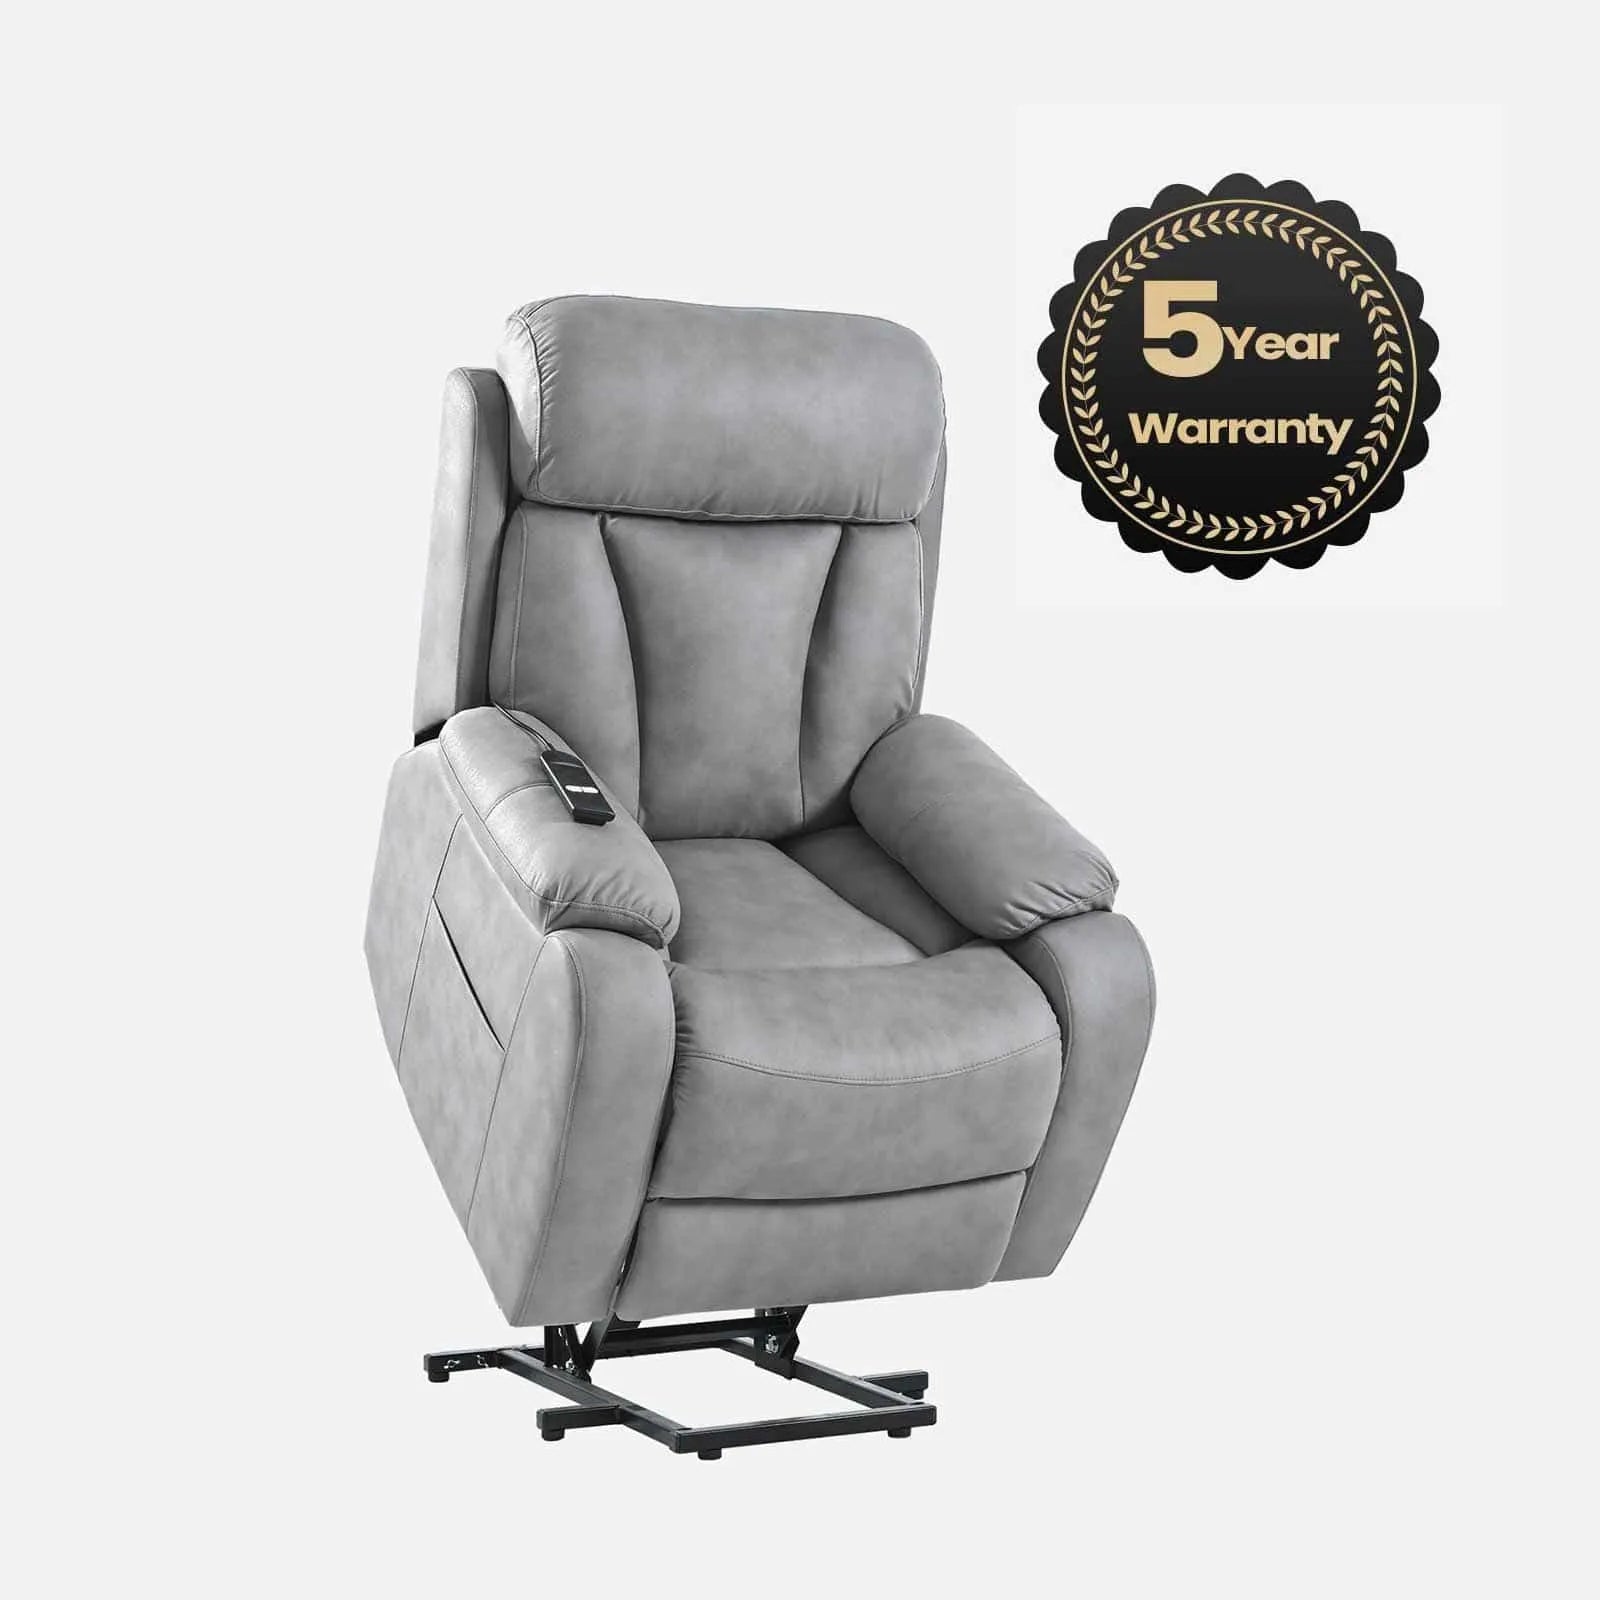 lift recliner chair with 5 year warranty